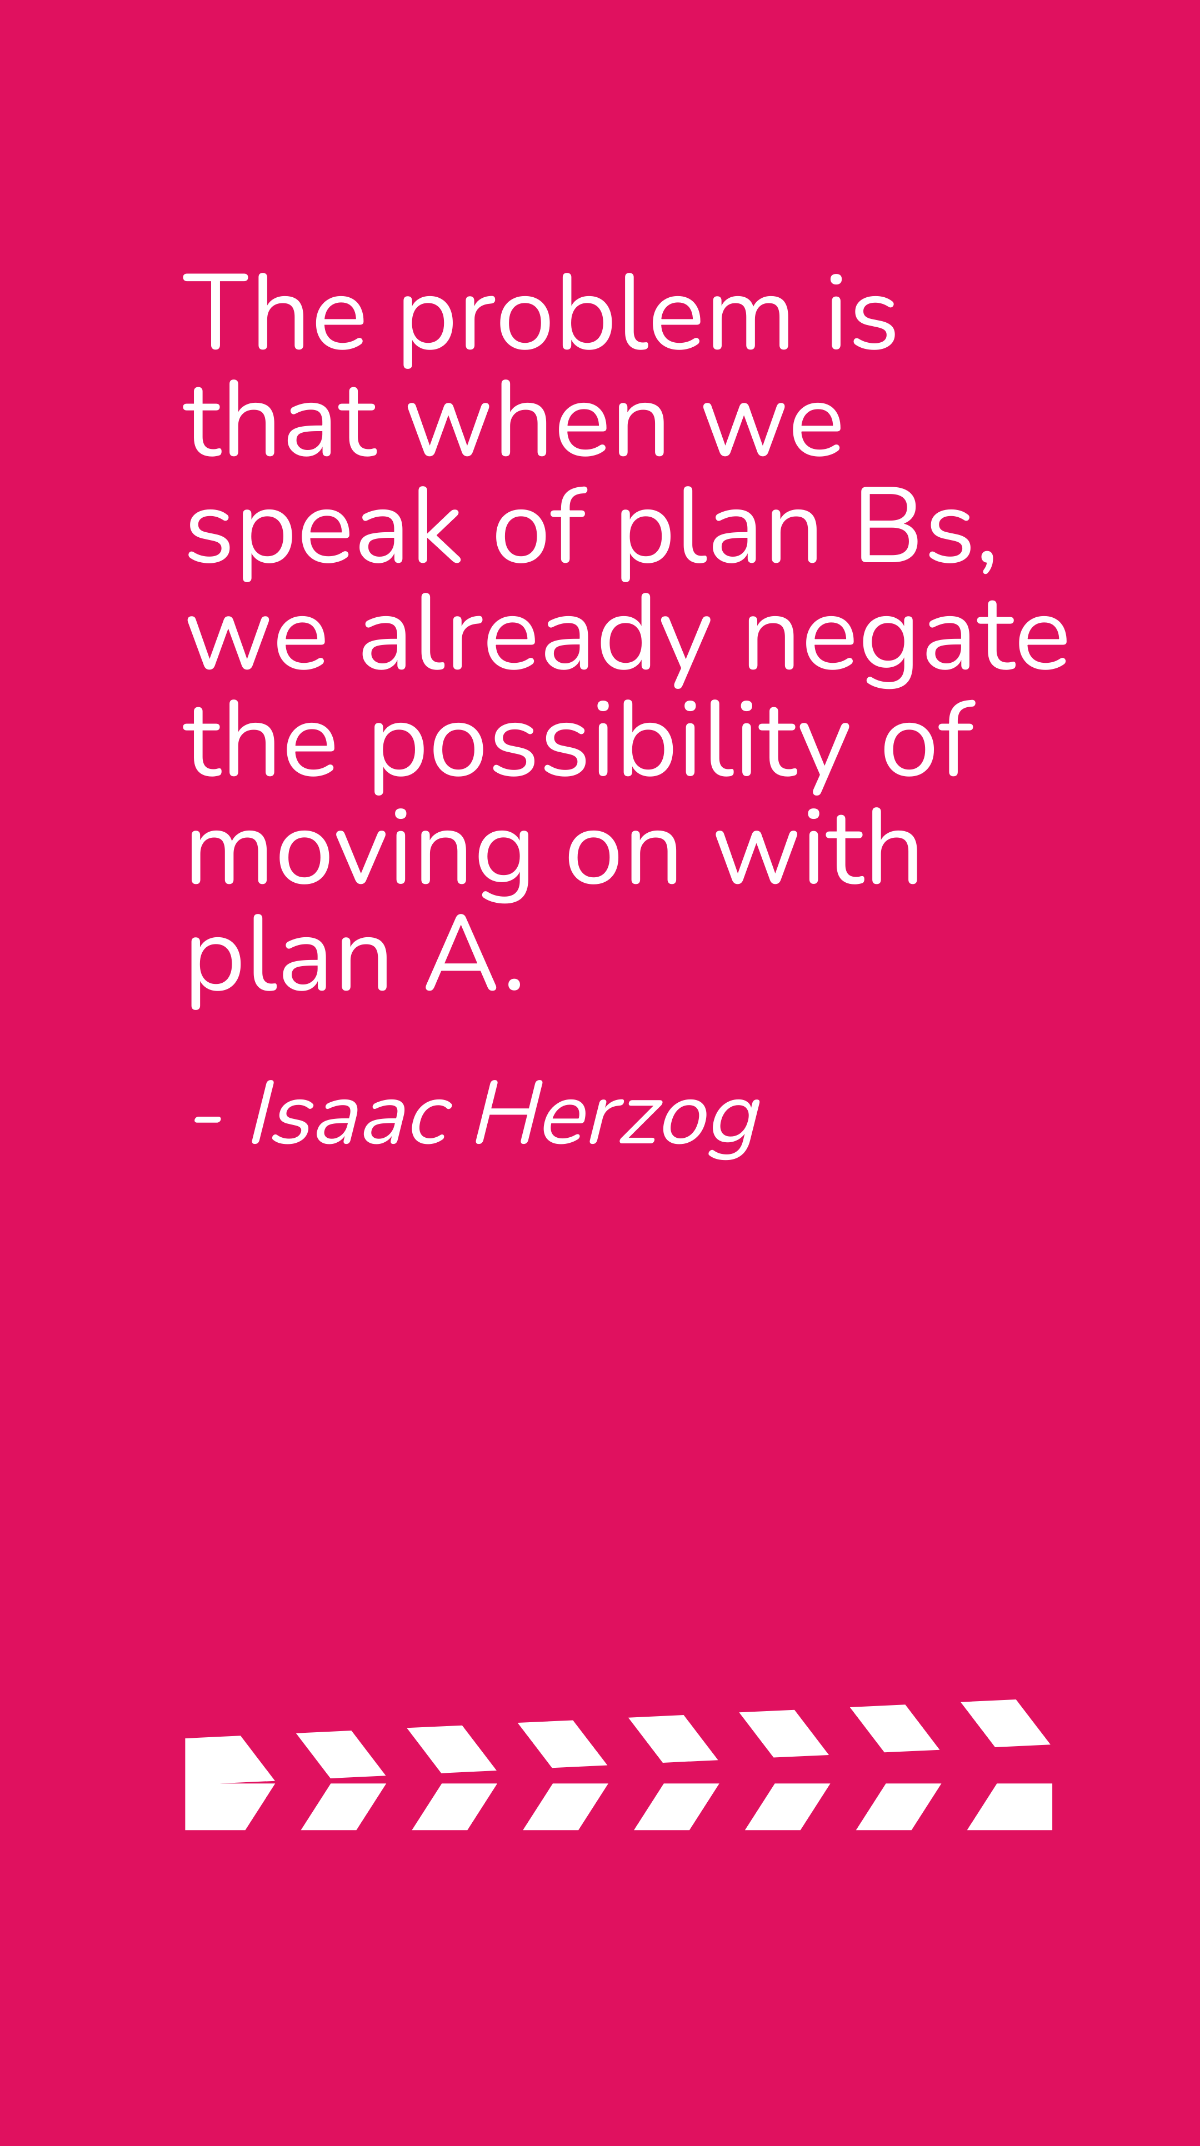 Isaac Herzog - The problem is that when we speak of plan Bs, we already negate the possibility of moving on with plan A. Template